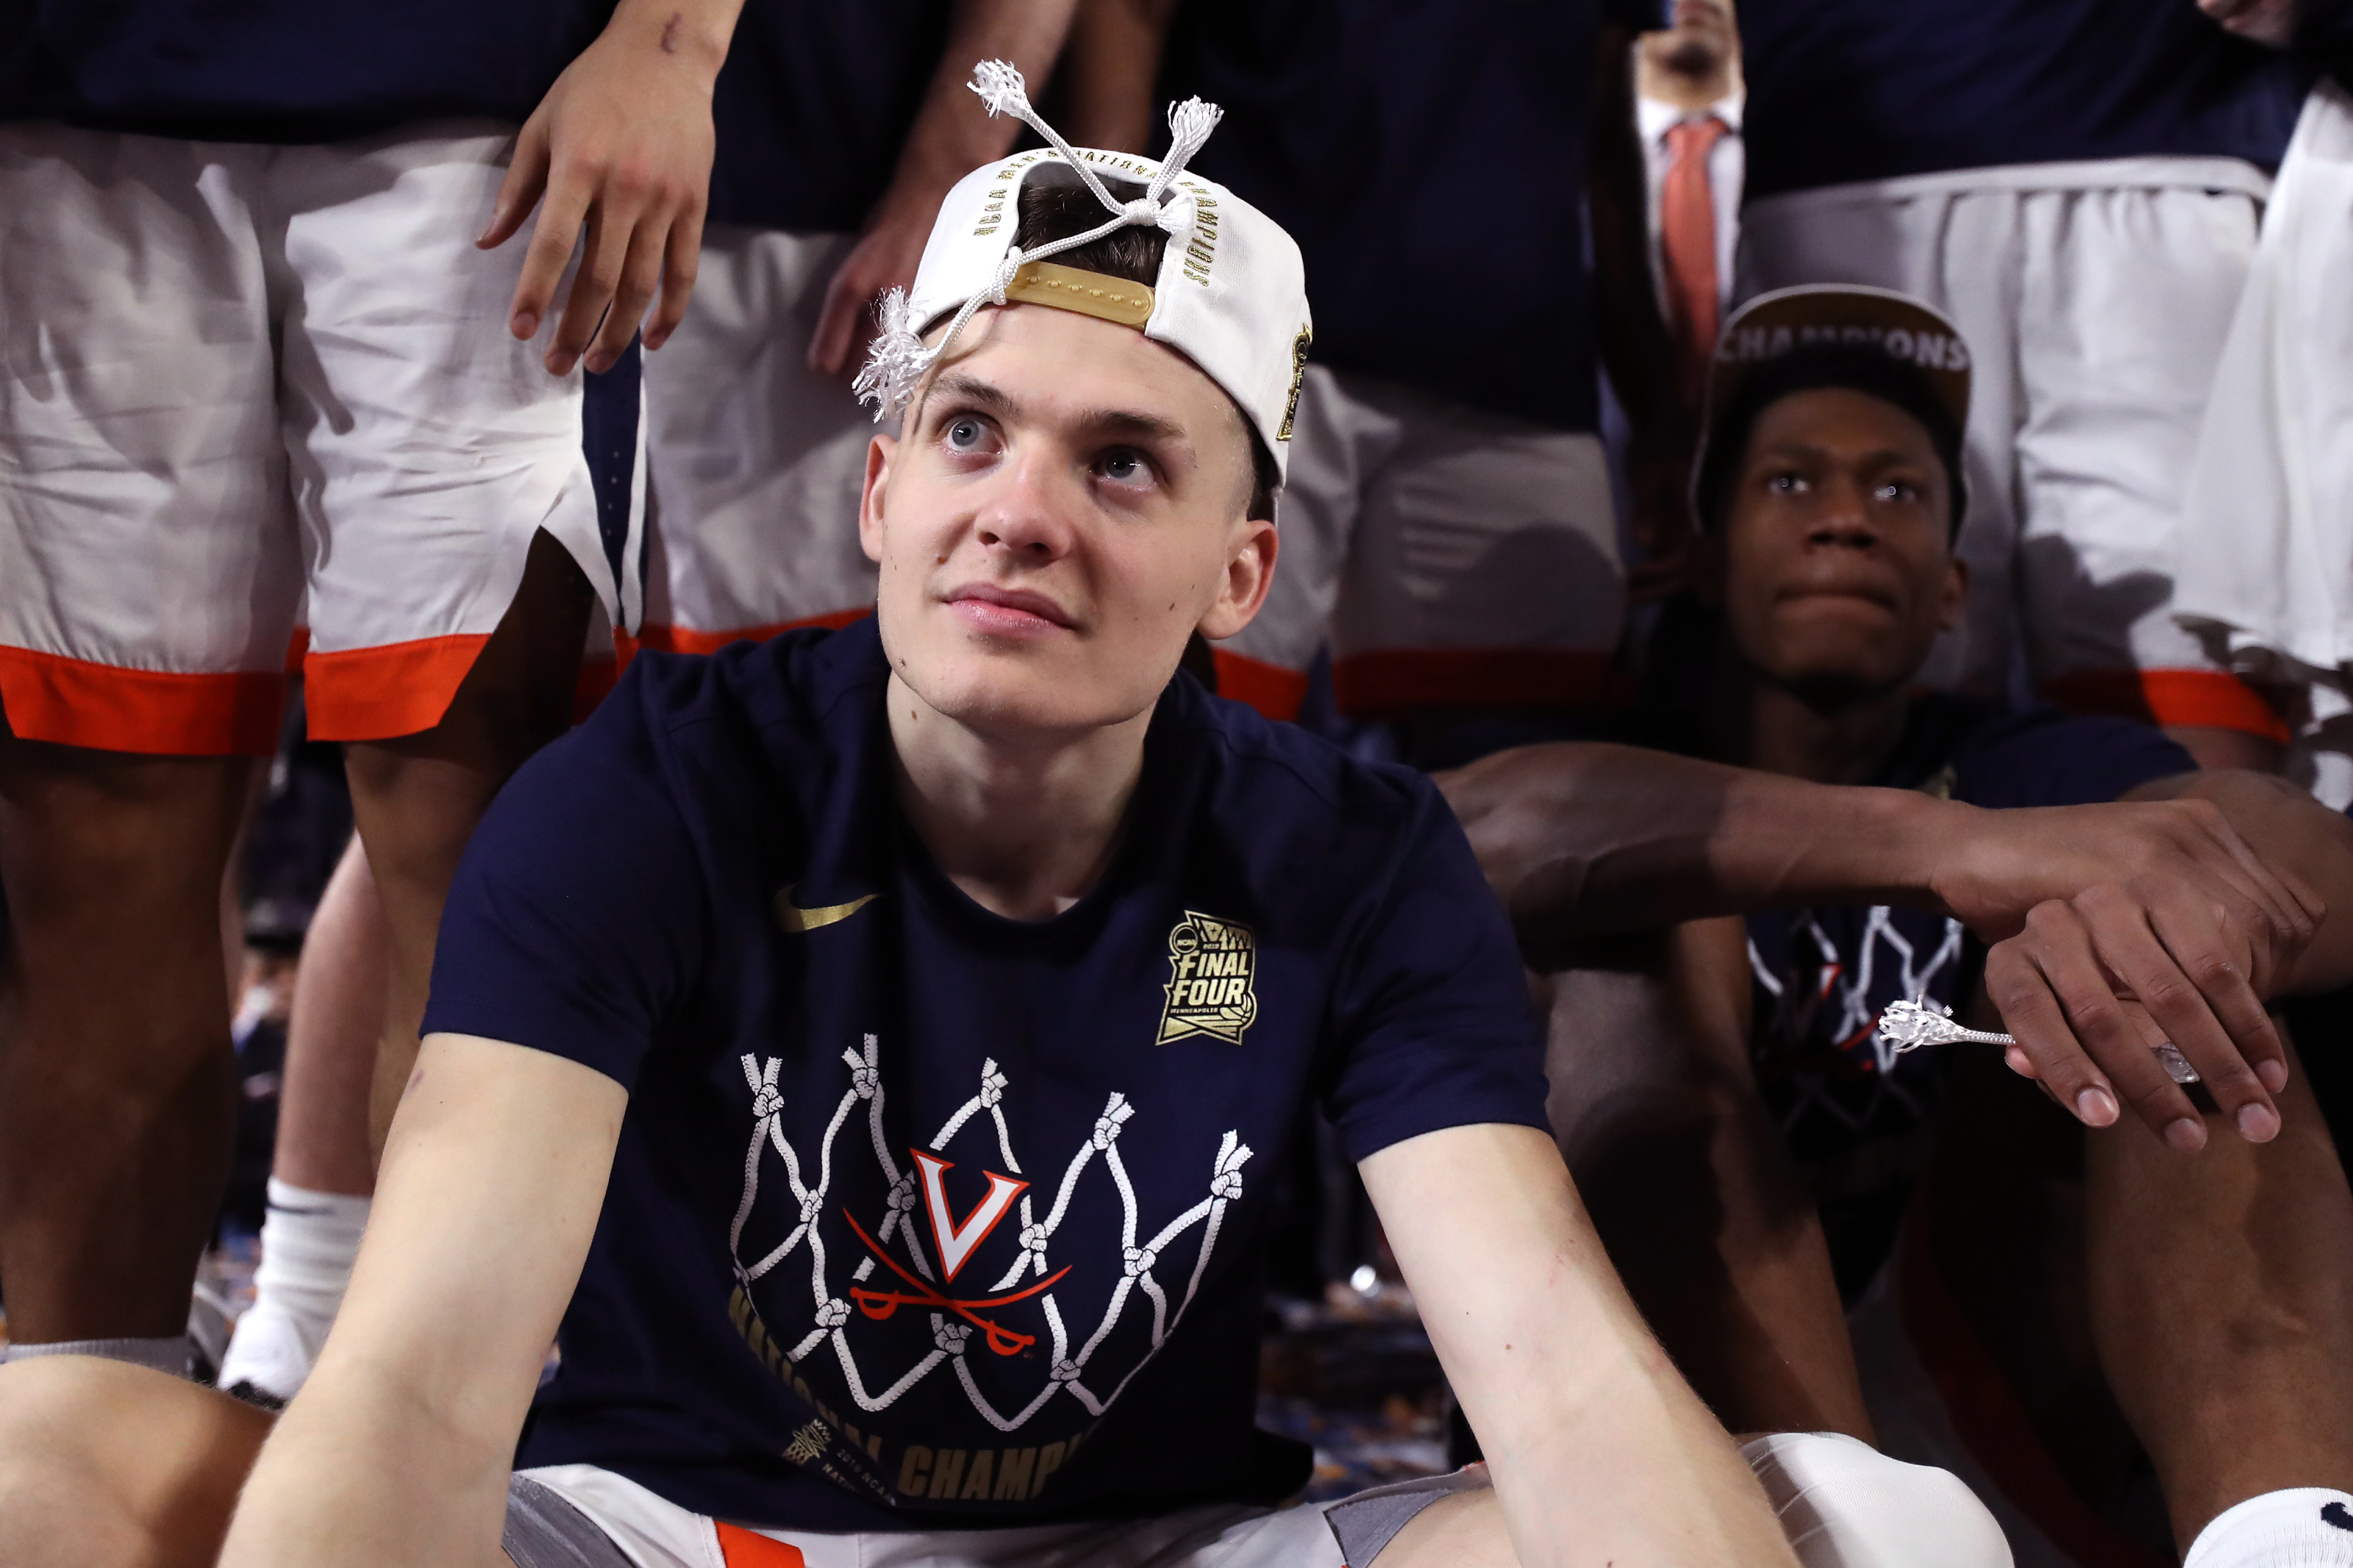 Kyle Guy drafted in second round, to join Kings